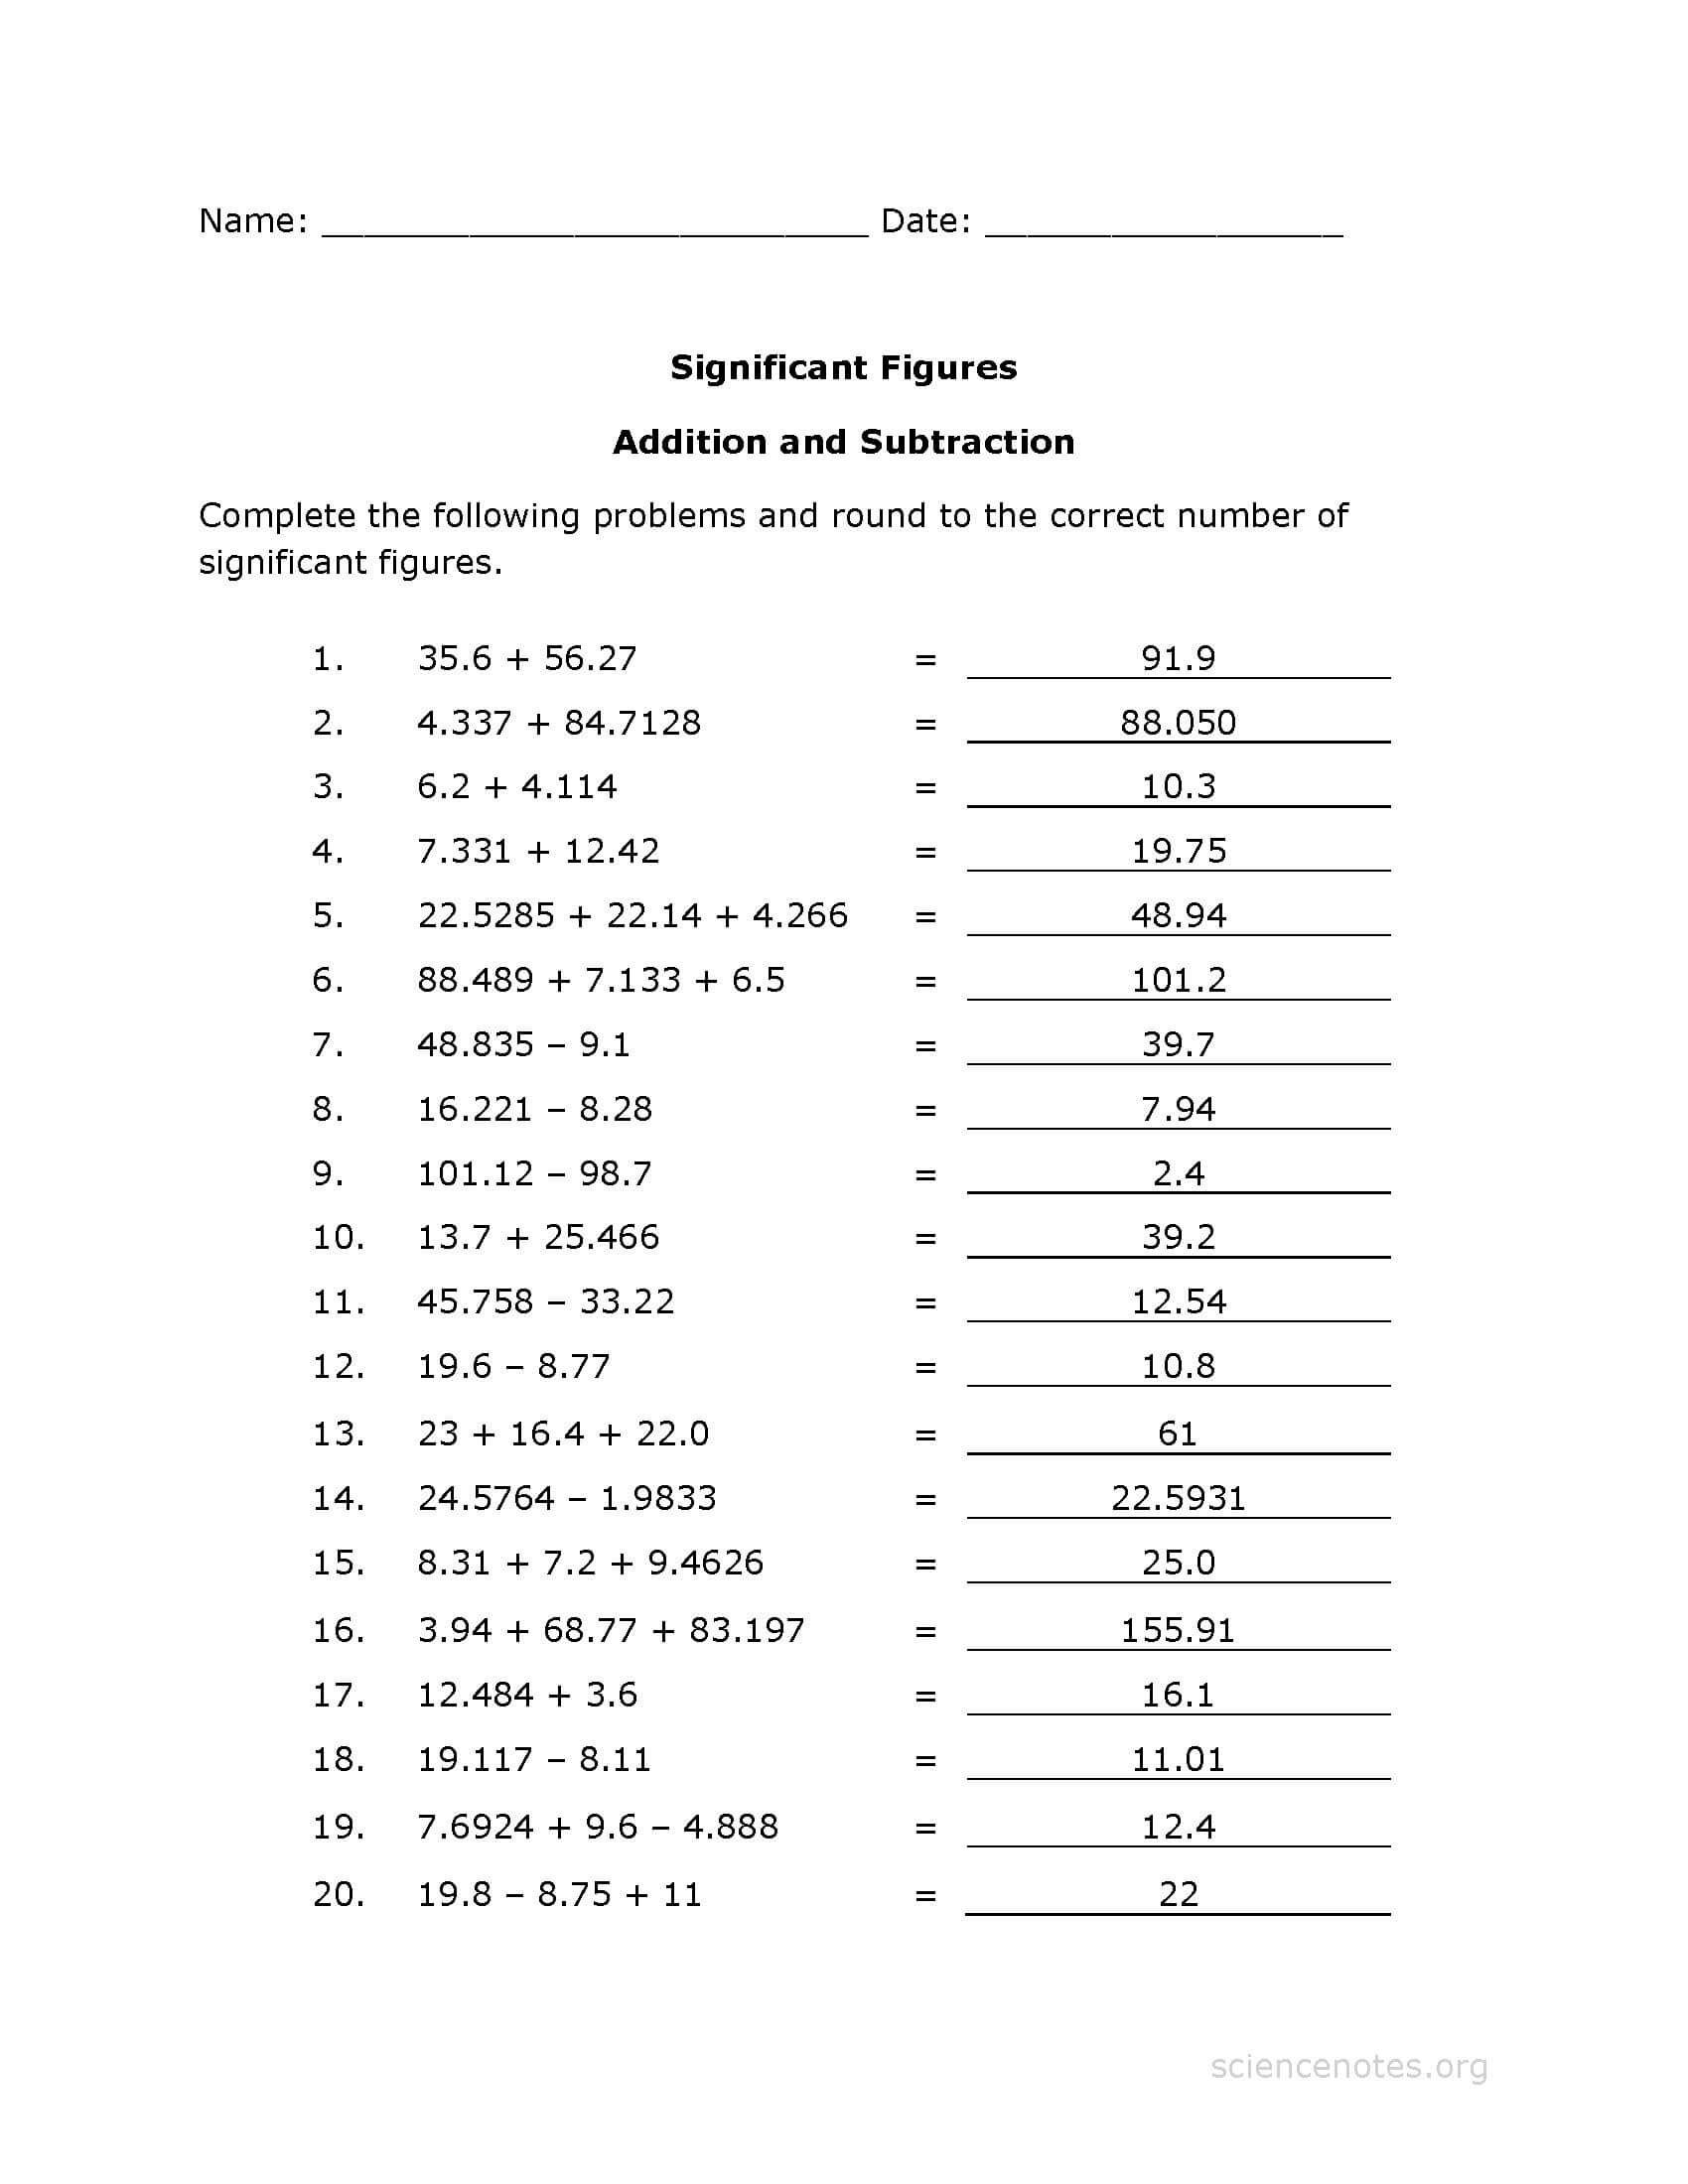 Significant Figures Worksheet Pdf  Addition Practice  Page